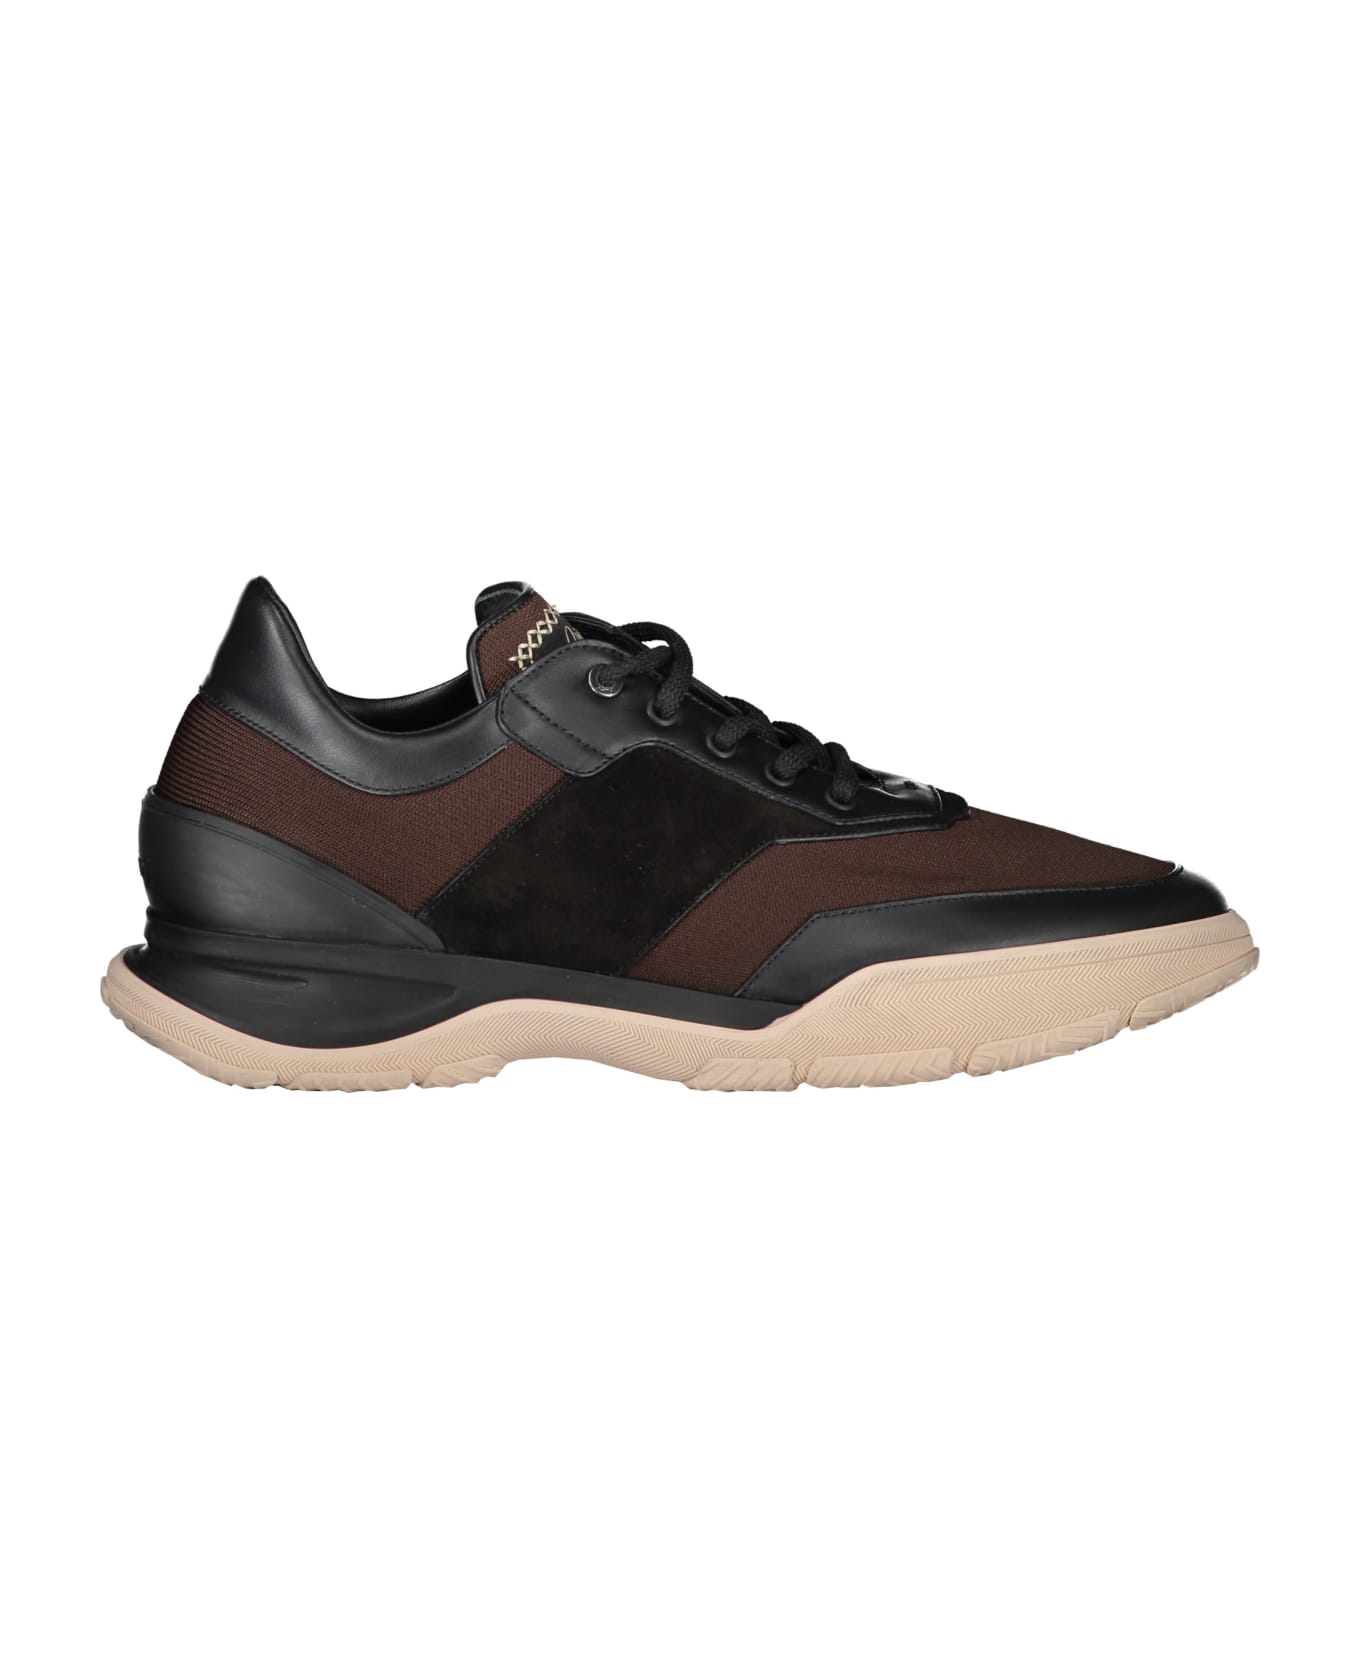 Brioni Leather Sneakers - brown スニーカー